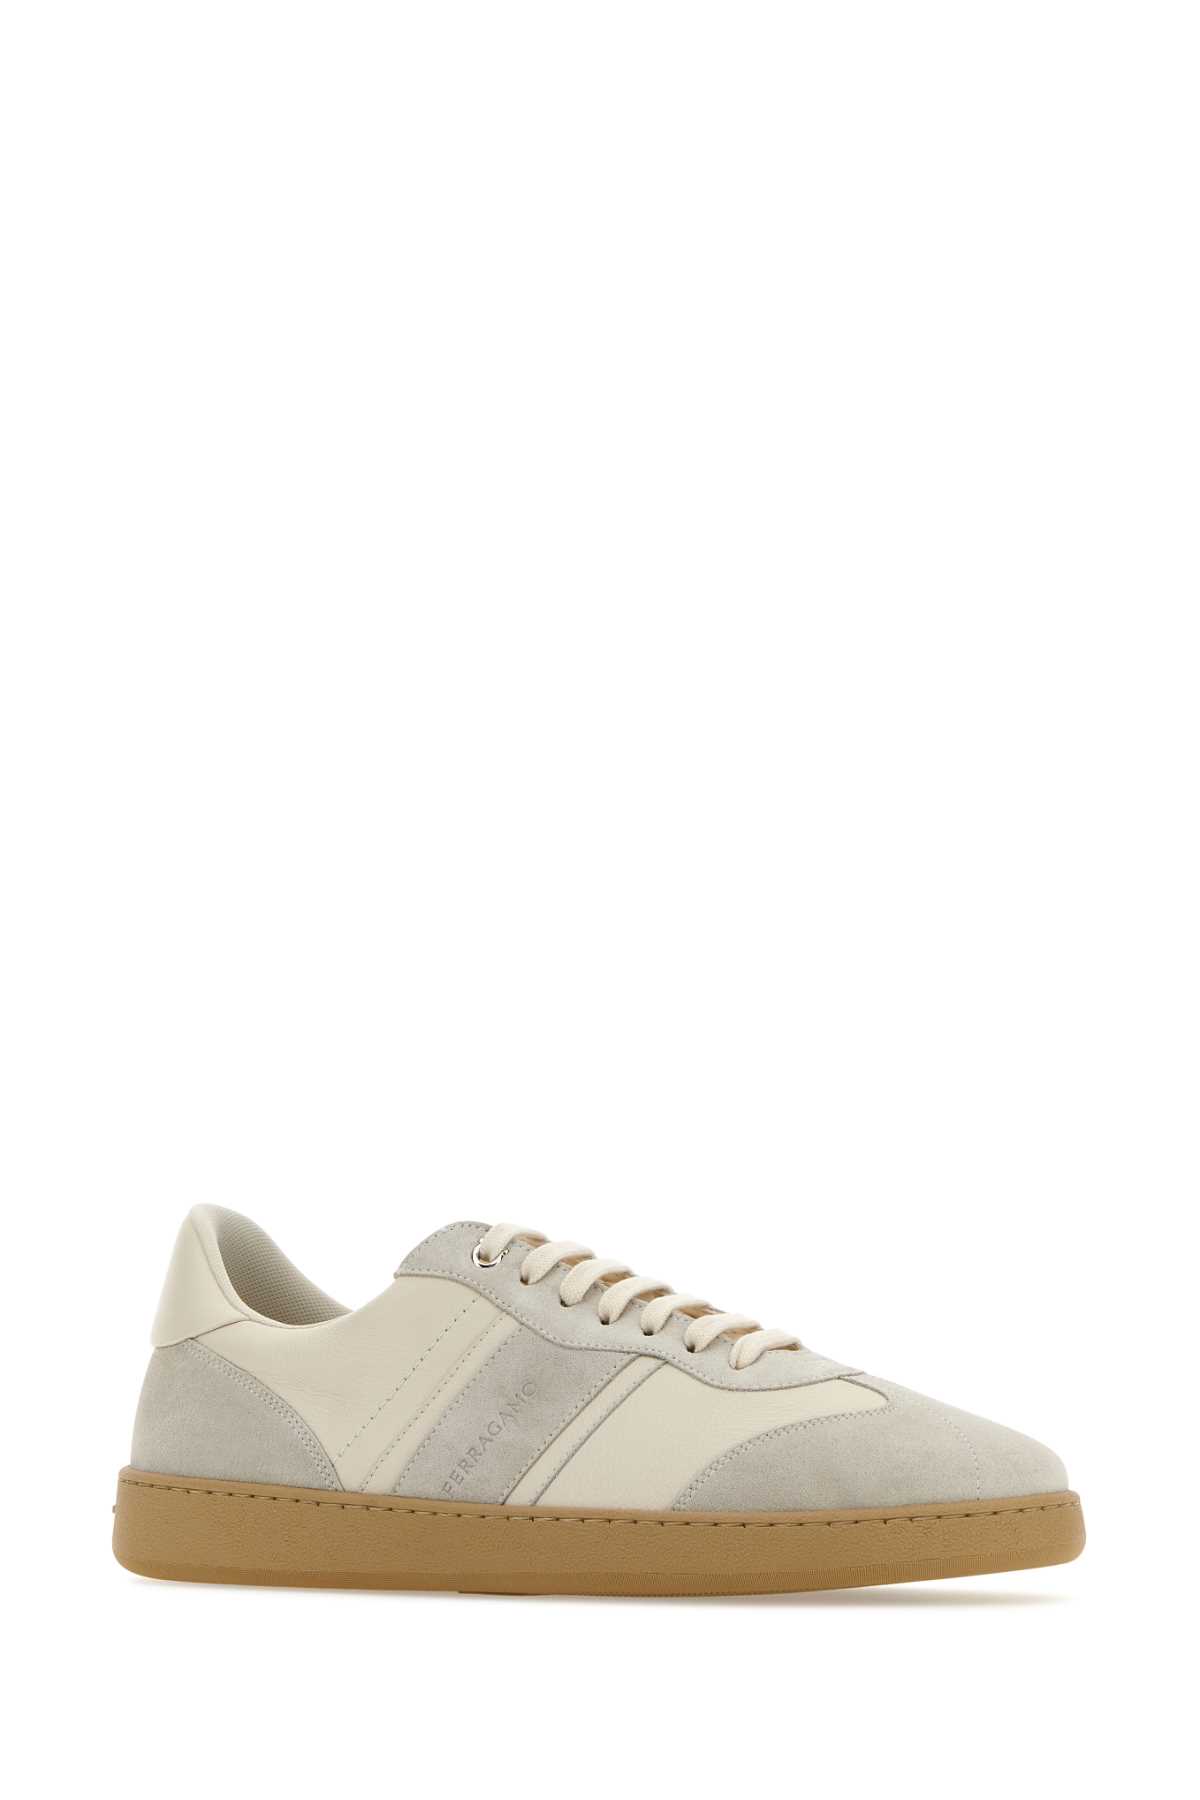 FERRAGAMO TWO-TONE LEATHER AND SUEDE ACHILLE SNEAKERS